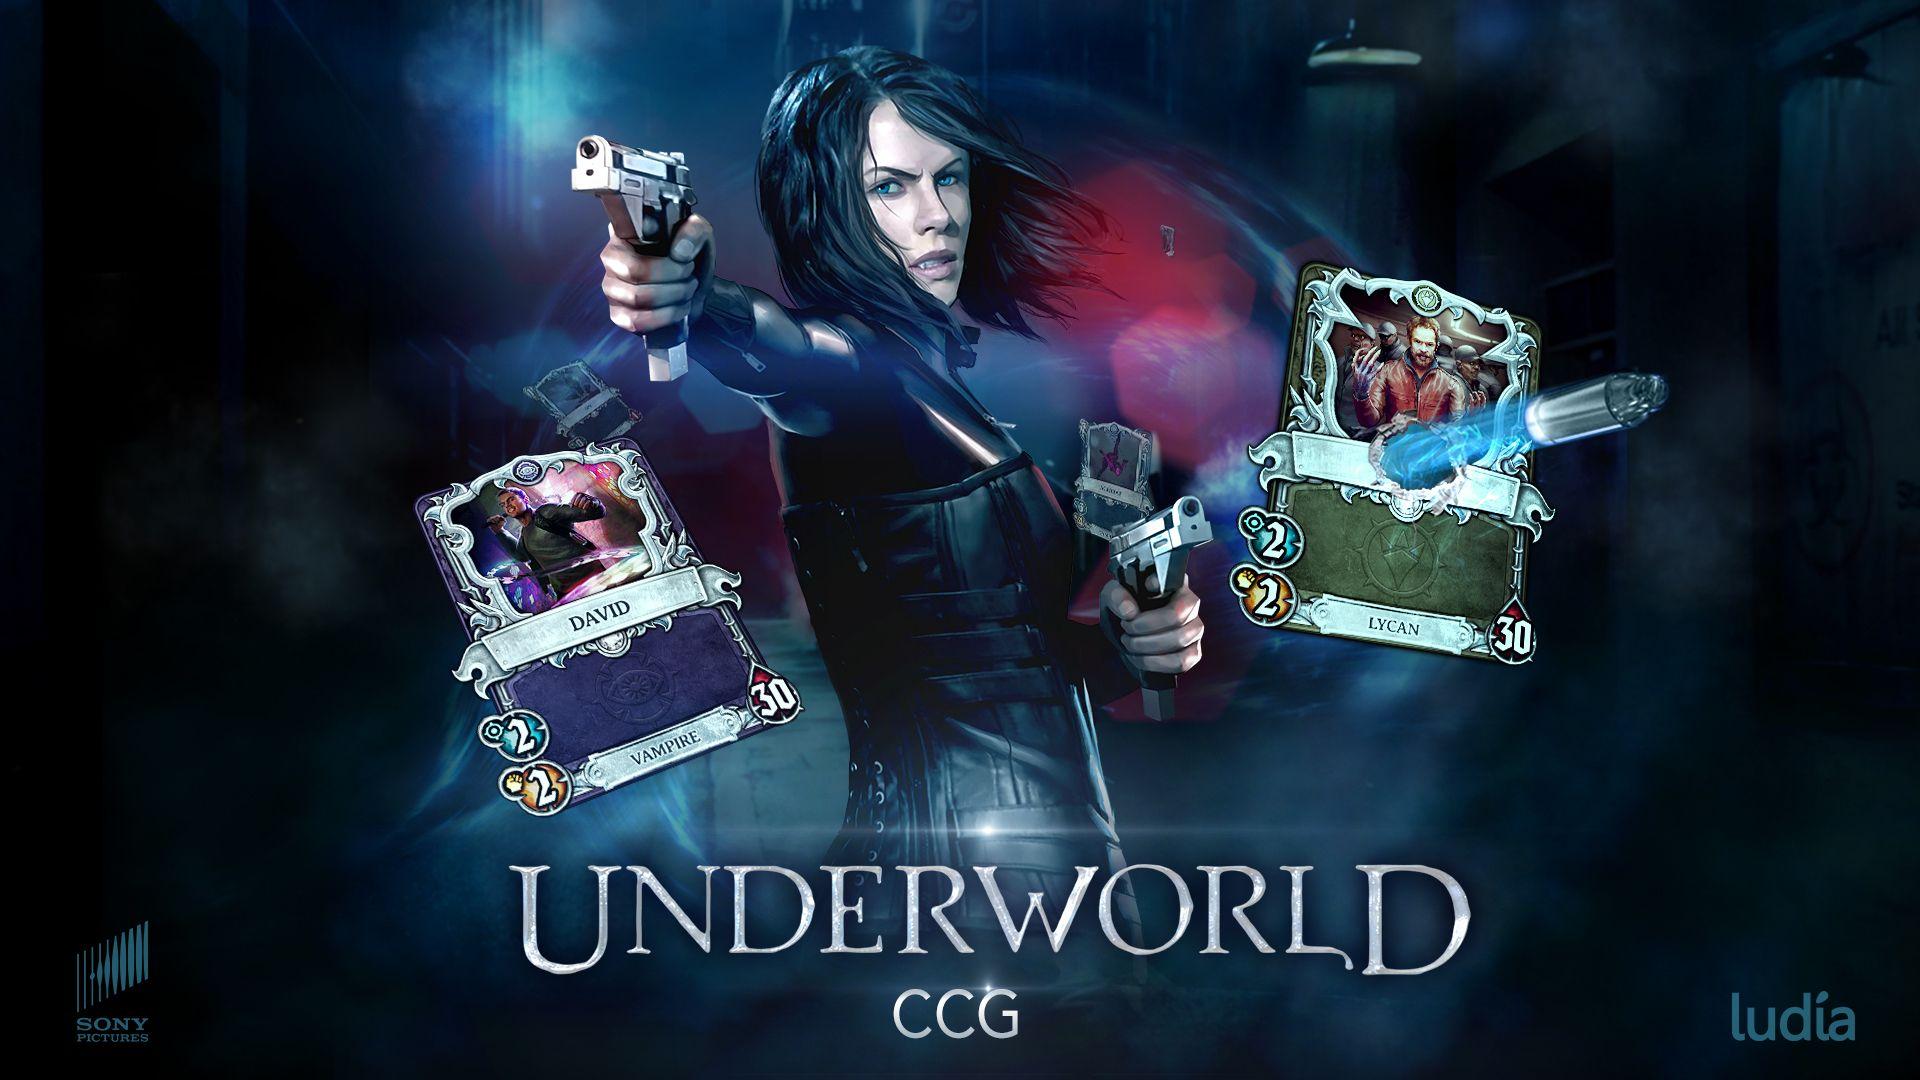 Underworld Vampire Logo - Underworld” Films Now a New Mobile Collectible Card Game as ...